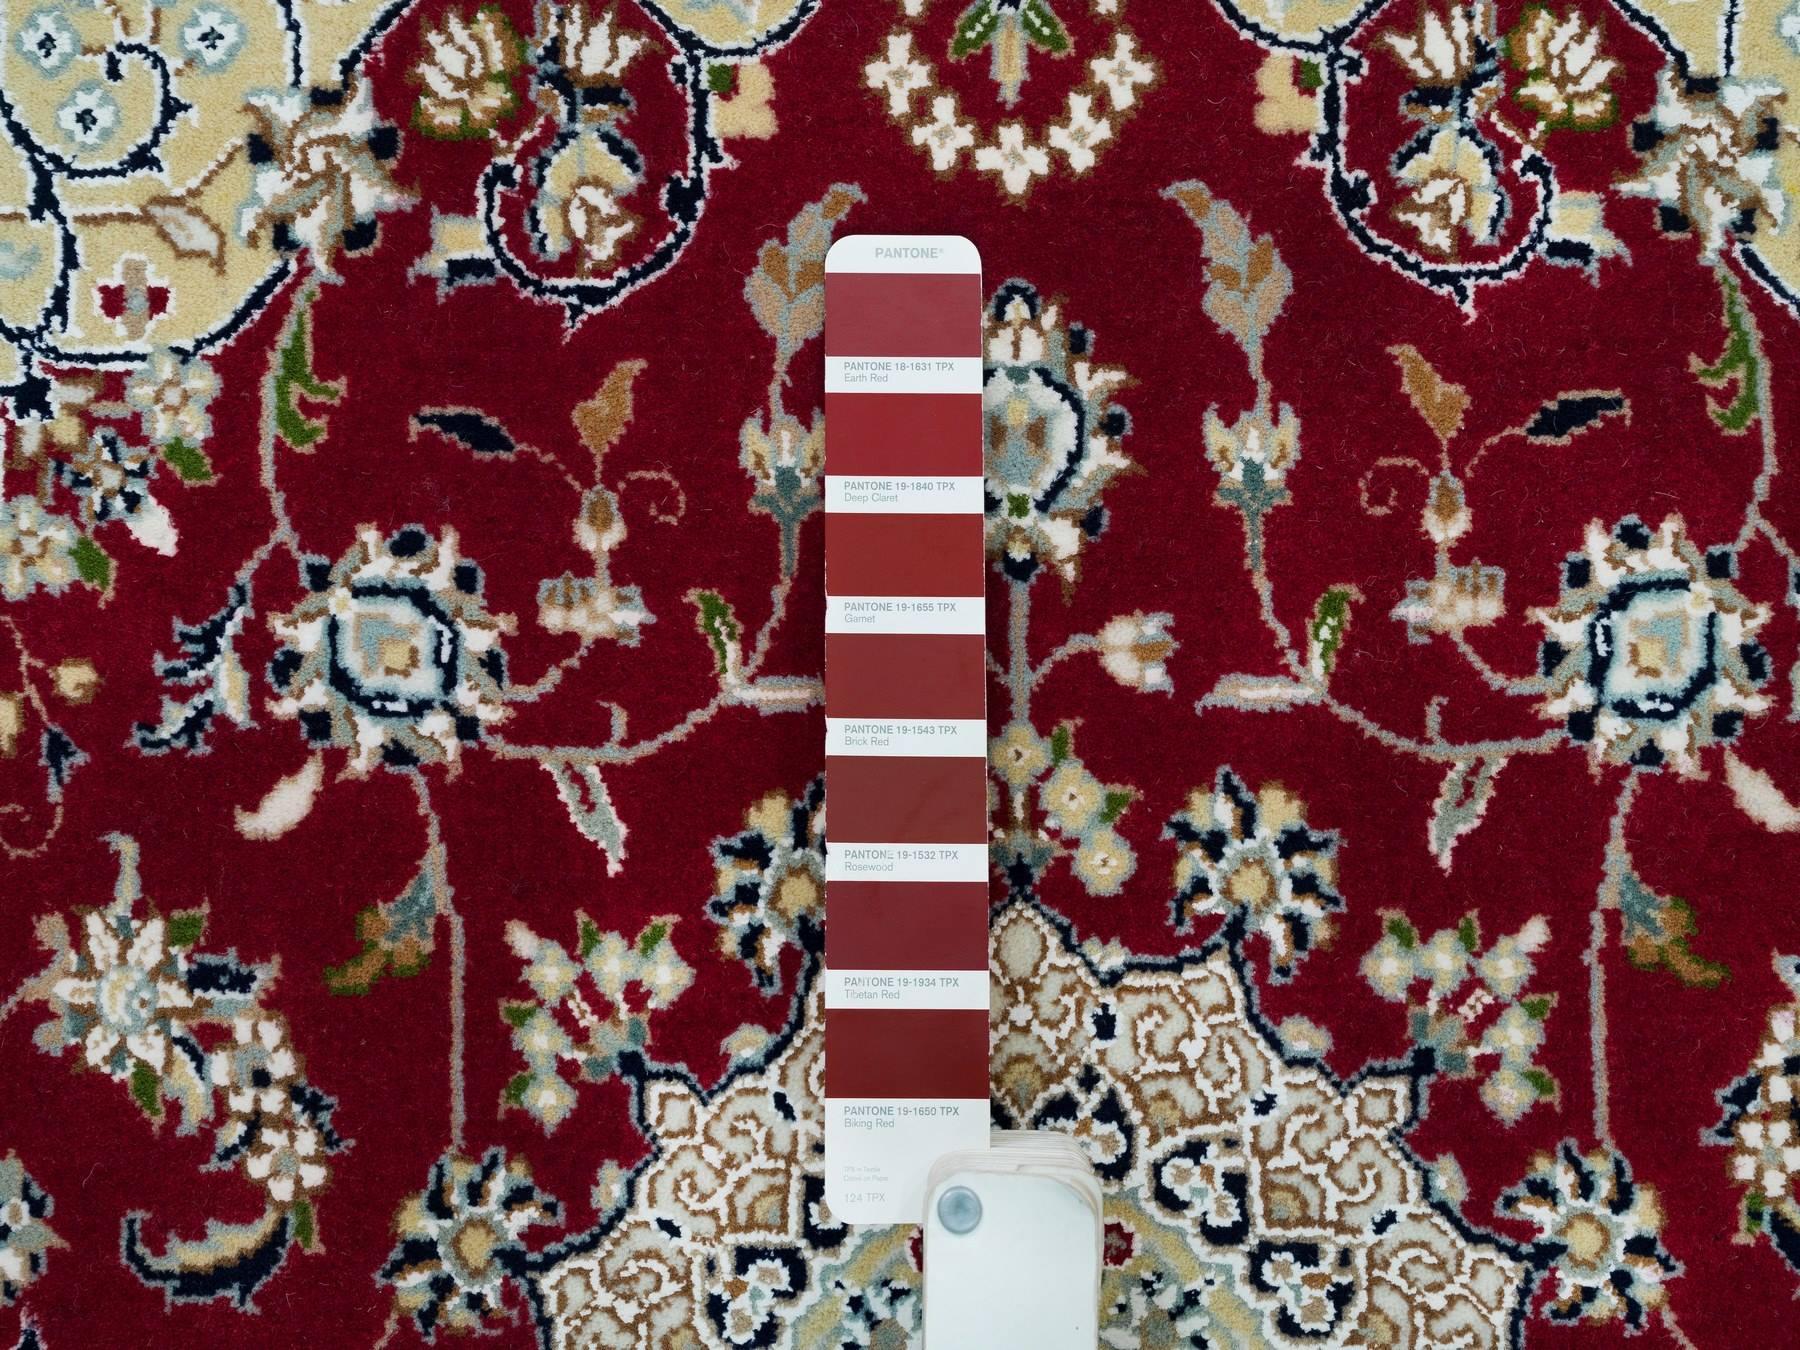 Traditional Rugs LUV810513